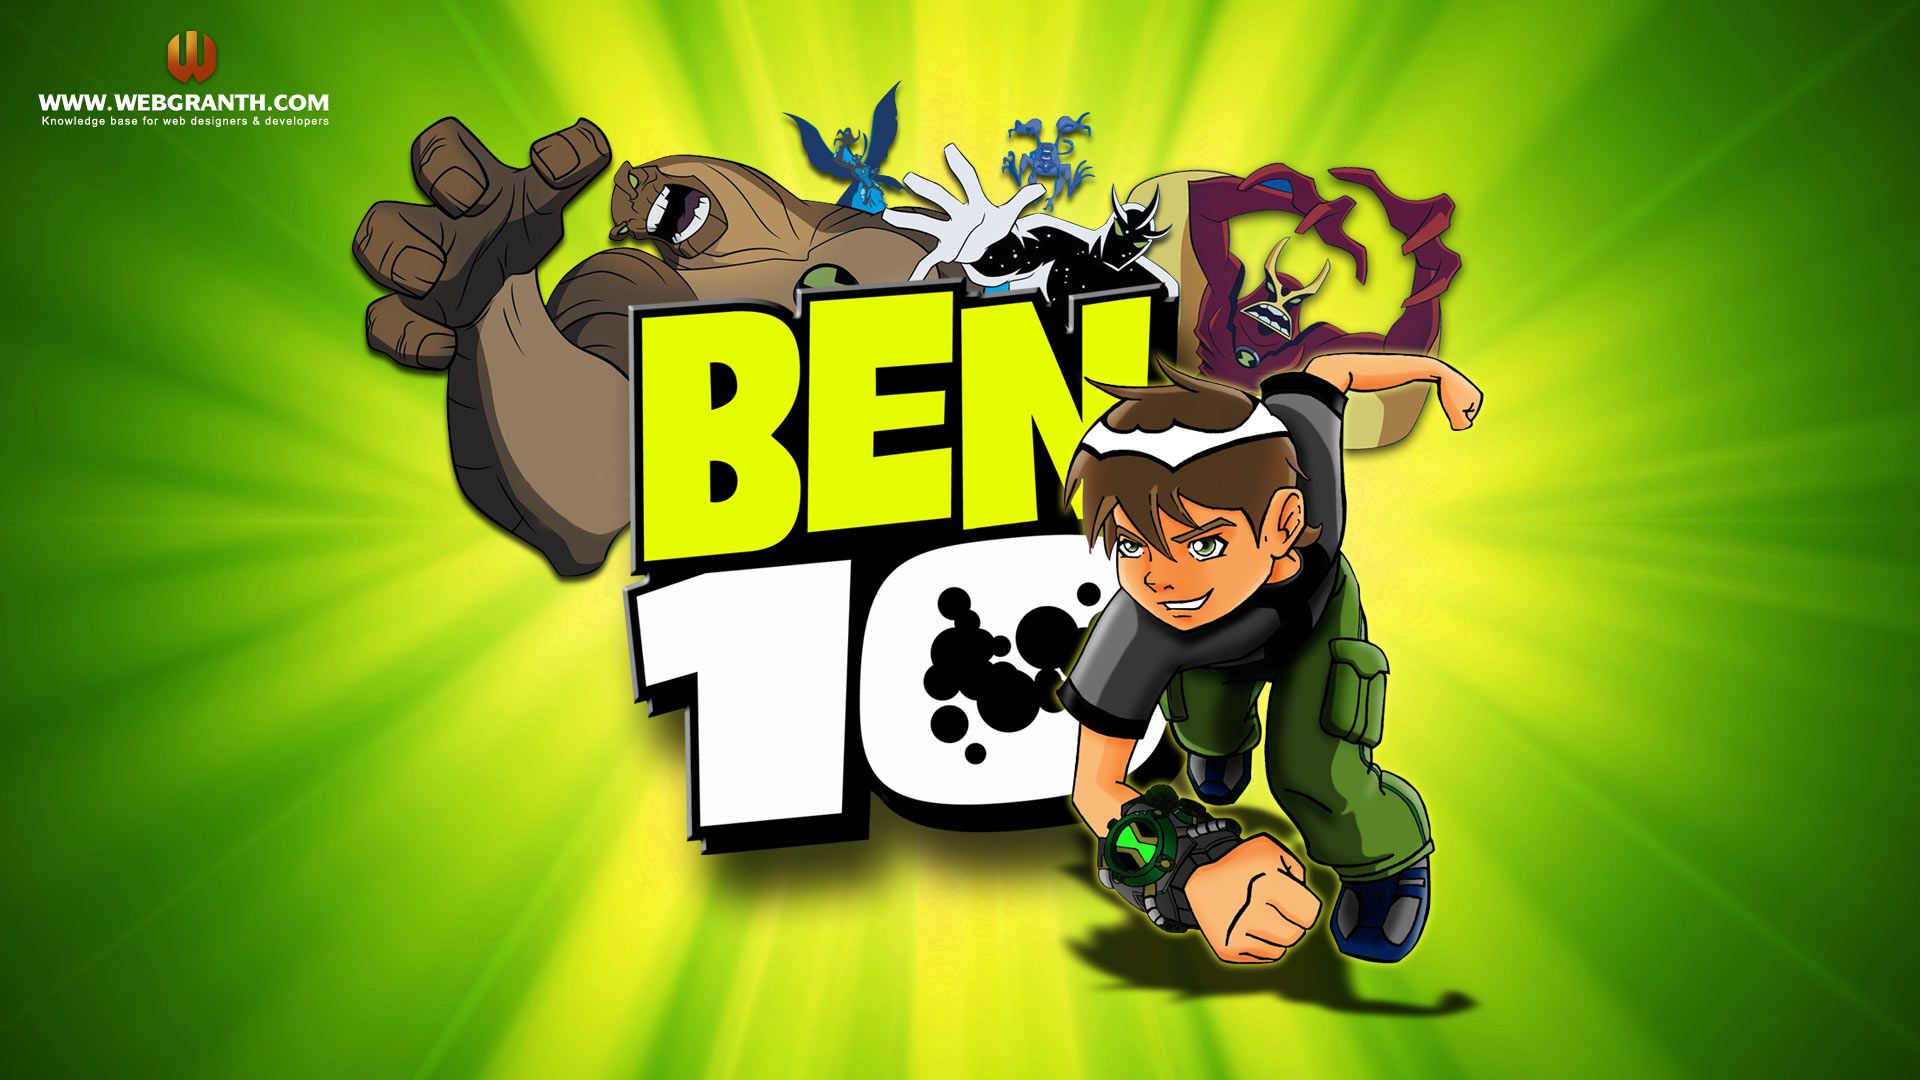 I made a Ben 10 wallpaper featuring almost every single alien  rBen10